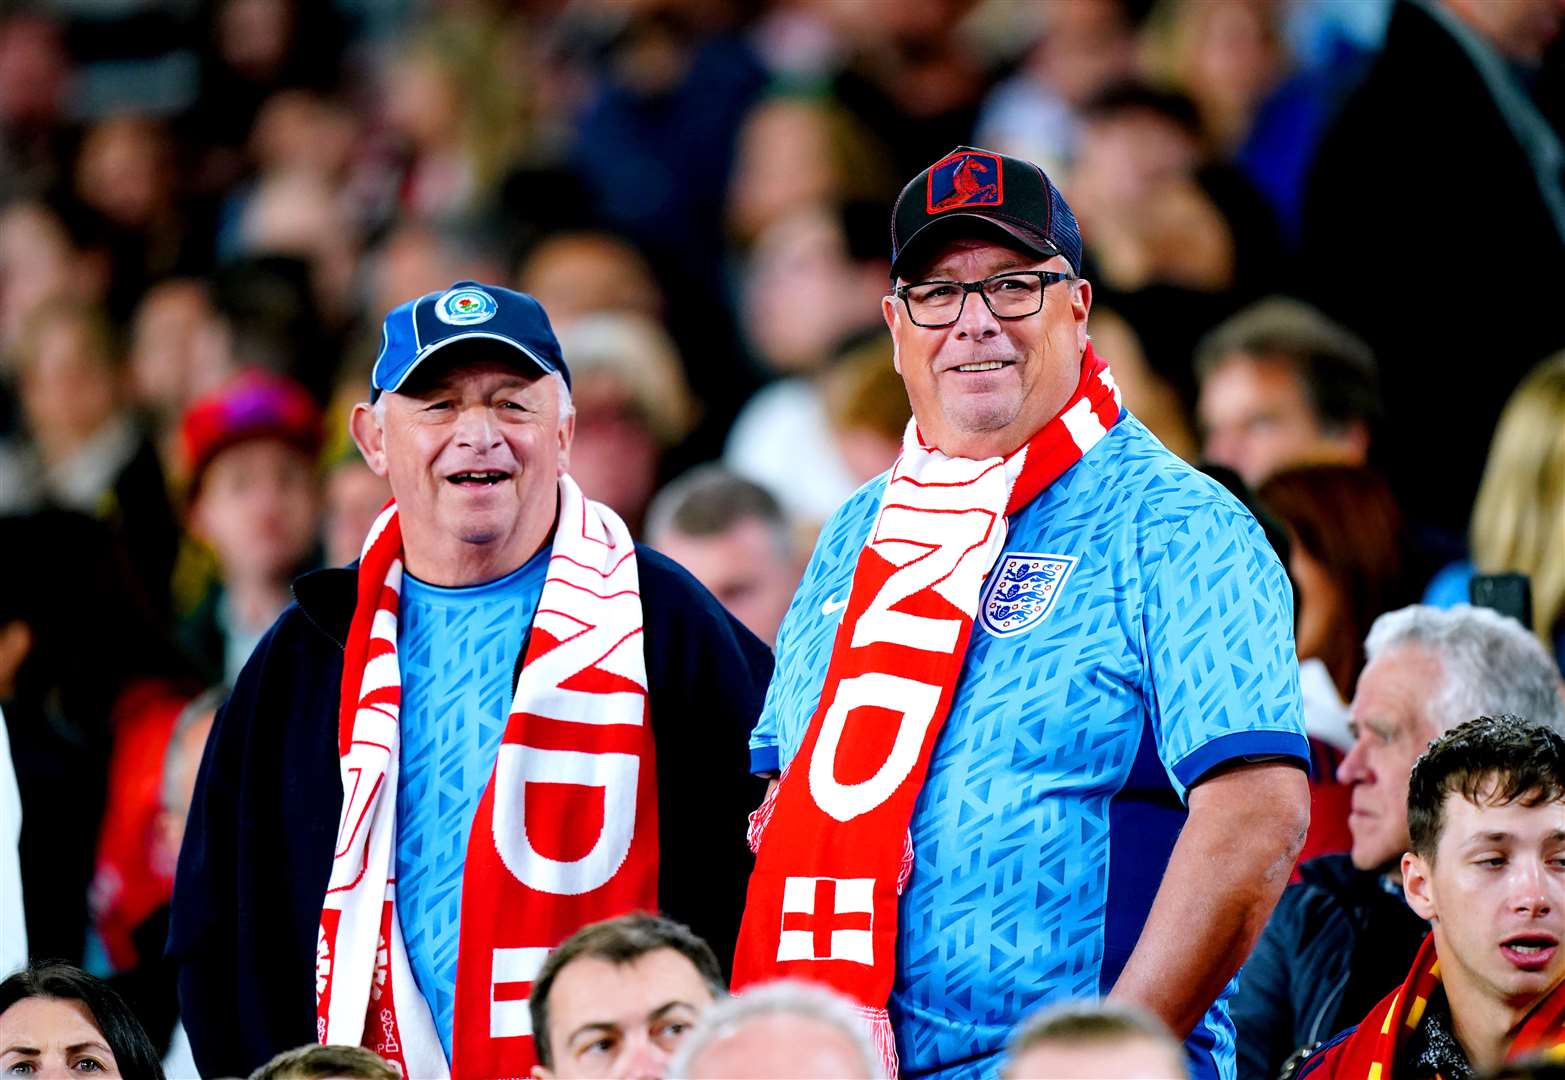 England fans in the stands ahead of the Women’s World Cup final in Sydney (Zac Goodwin/PA)